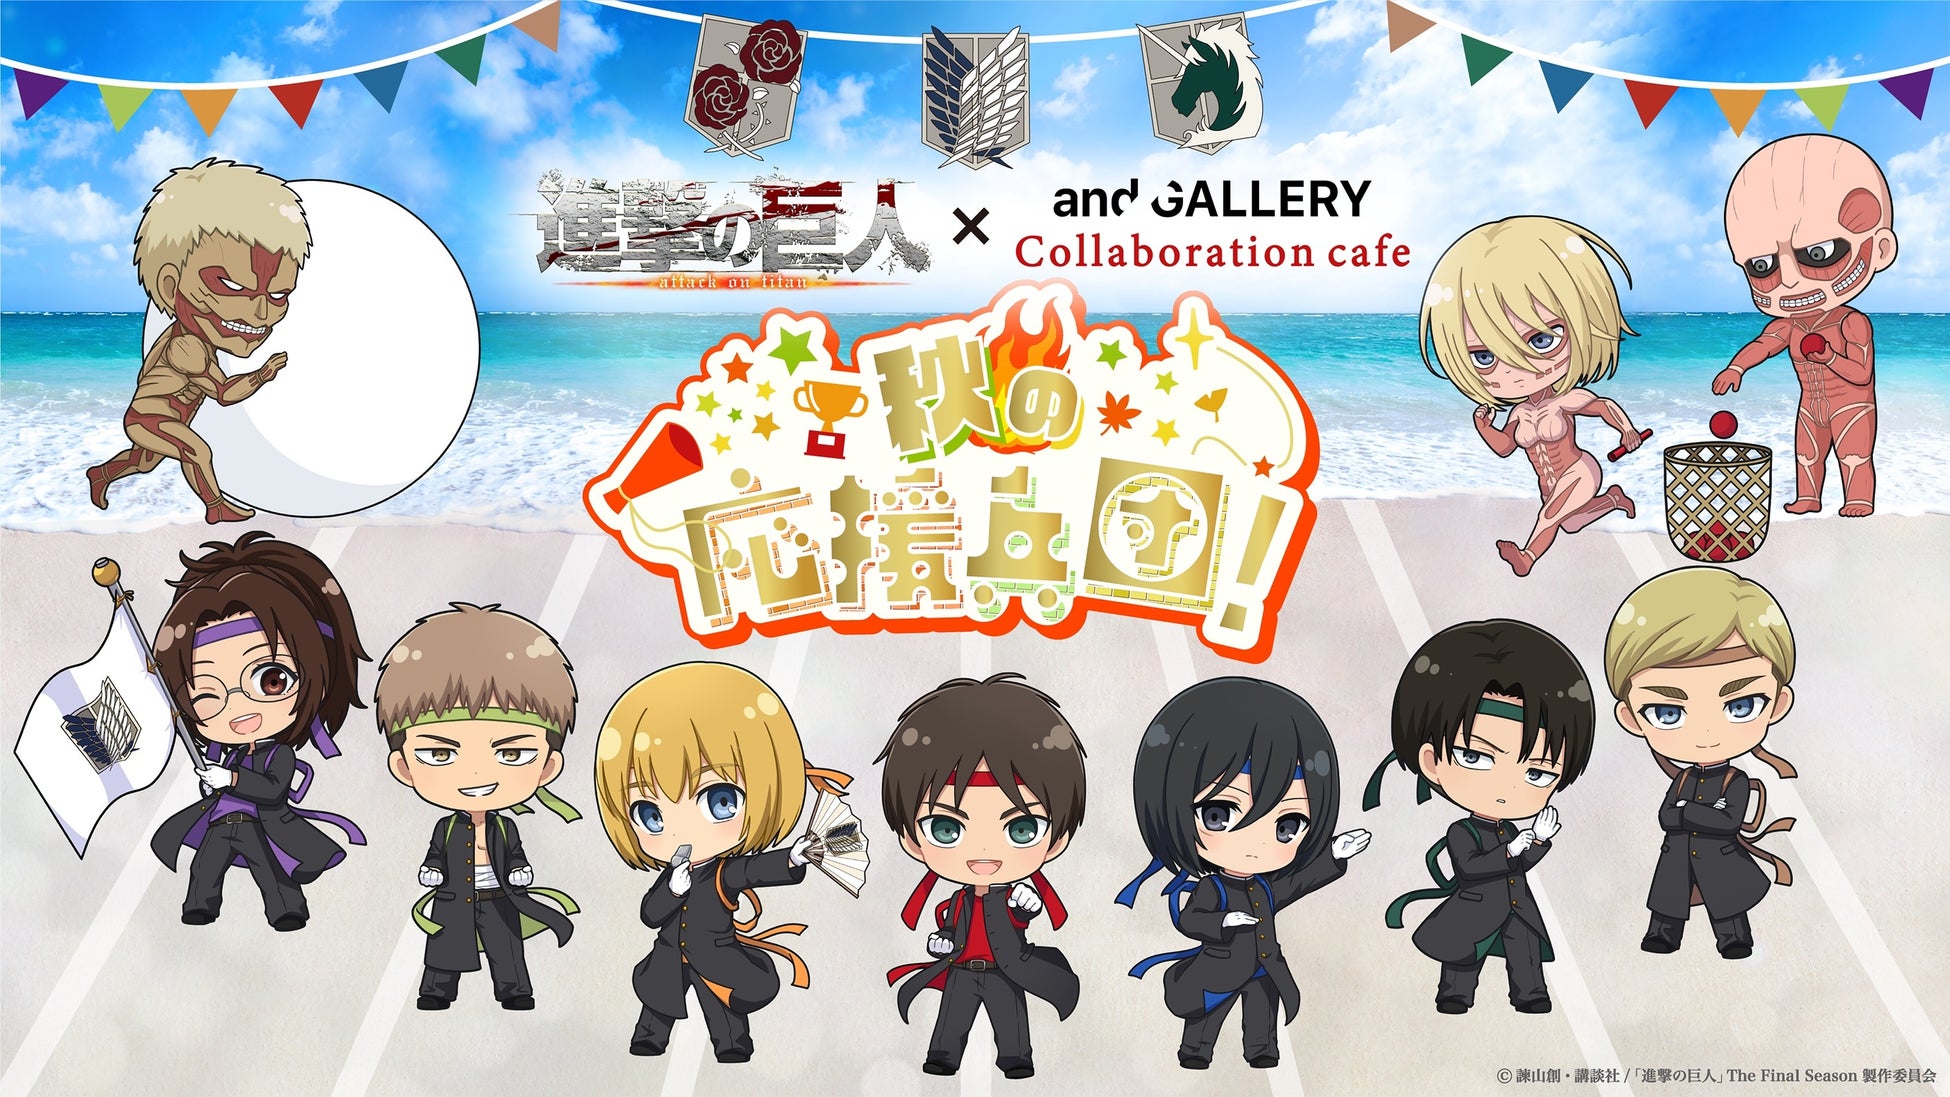 TV ANIMATION 『Attack On Titan』s Collaboration Cafes will open from 9/2 at 「and GALLERY」のサブ画像1